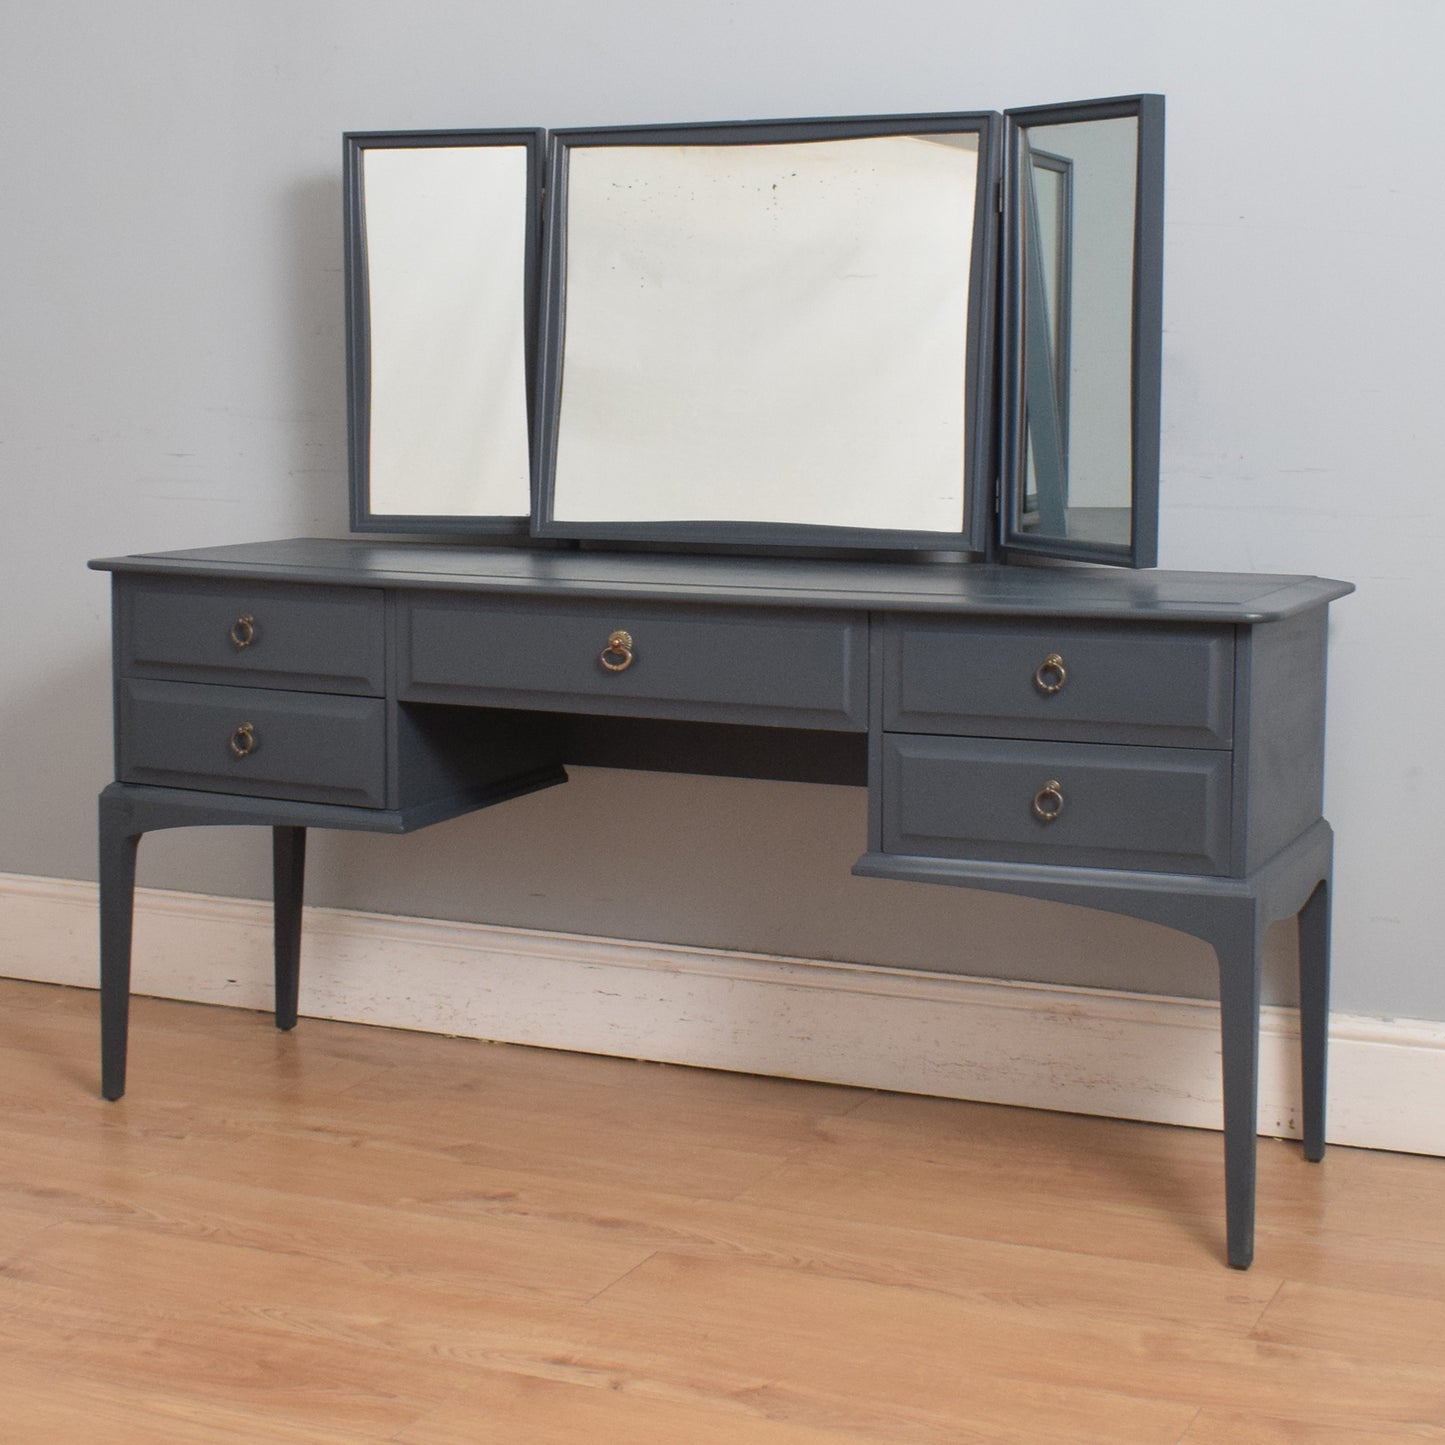 Painted 'Stag' Dressing Table